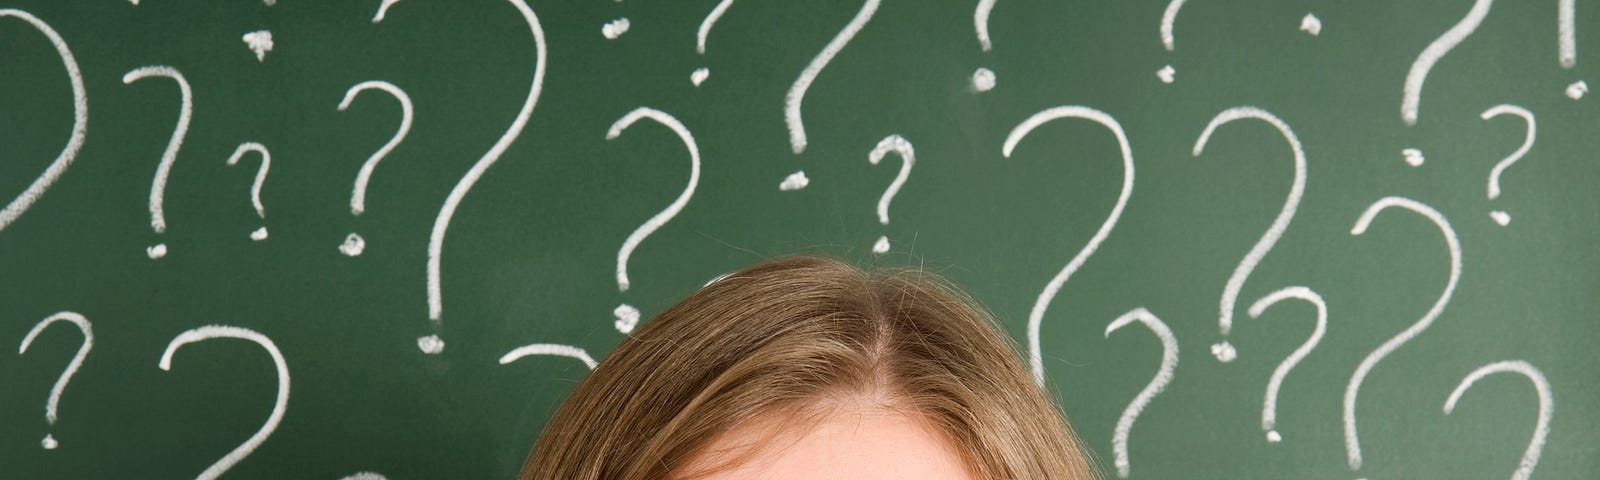 The top half of a white woman’s face is visible at the bottom of the image, looking up into a cloud of question marks. She looks confused at the number of options available to her.